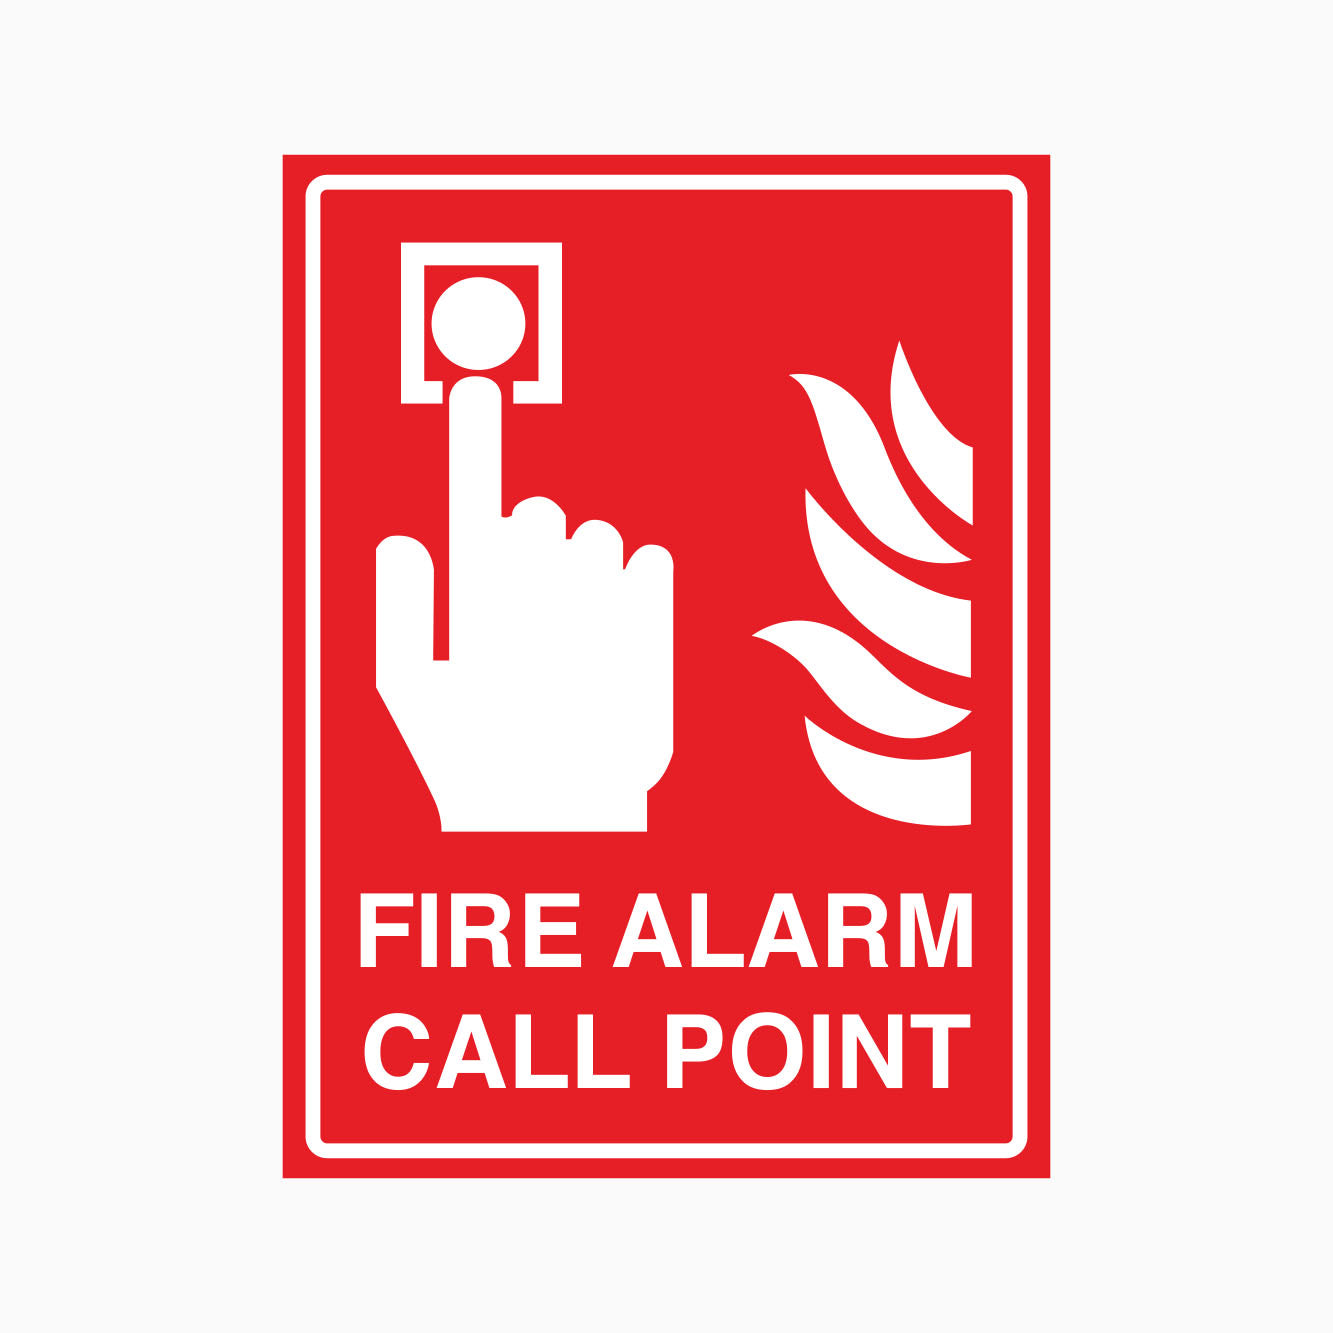 FIRE ALARM CALL POINT SIGN - GET SIGNS